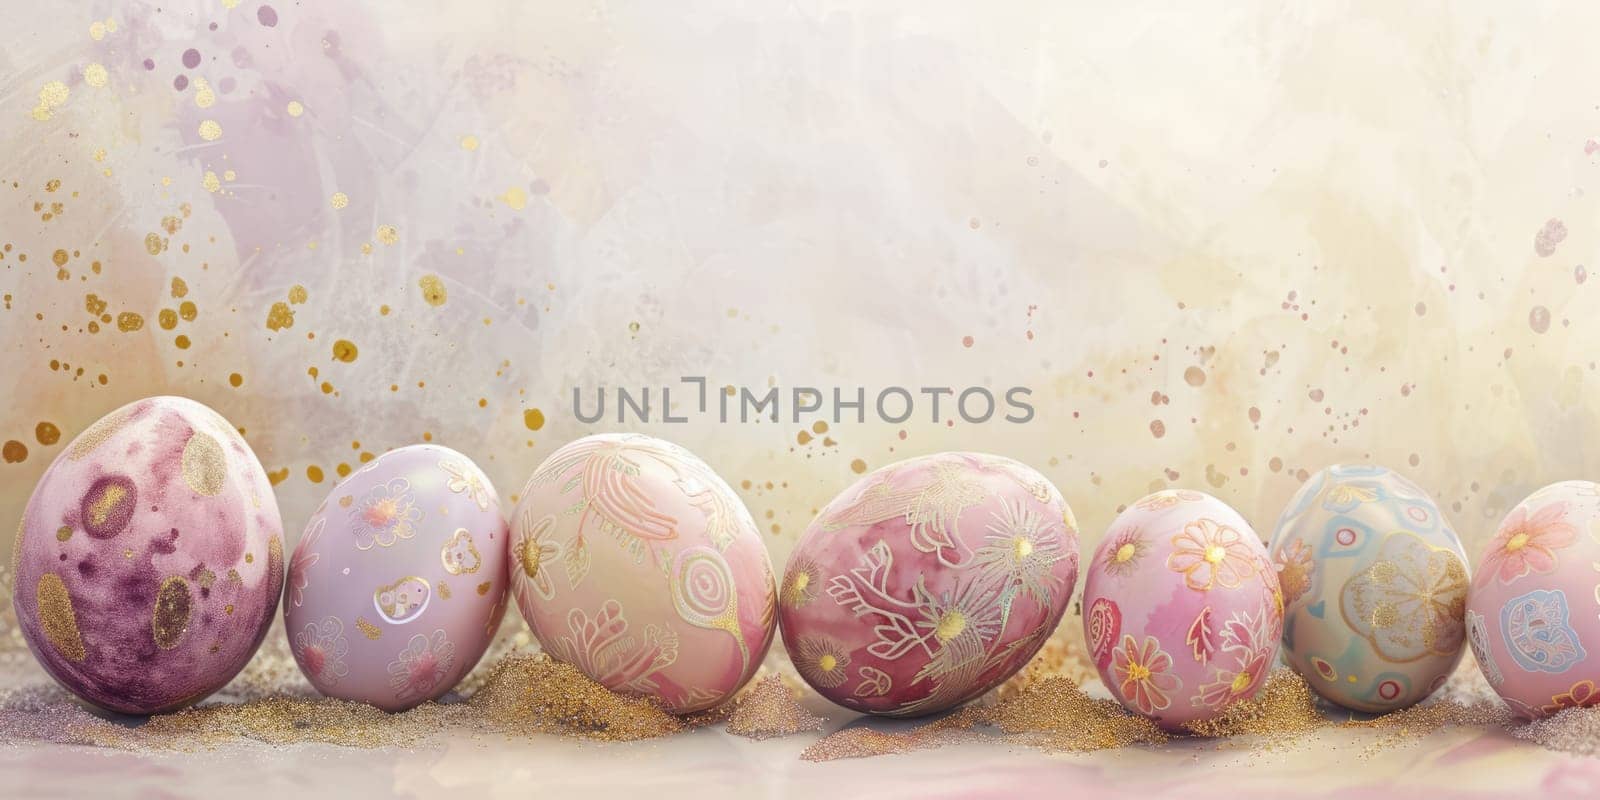 Colorful Easter eggs arranged on white background in artistic display AIG42E by biancoblue